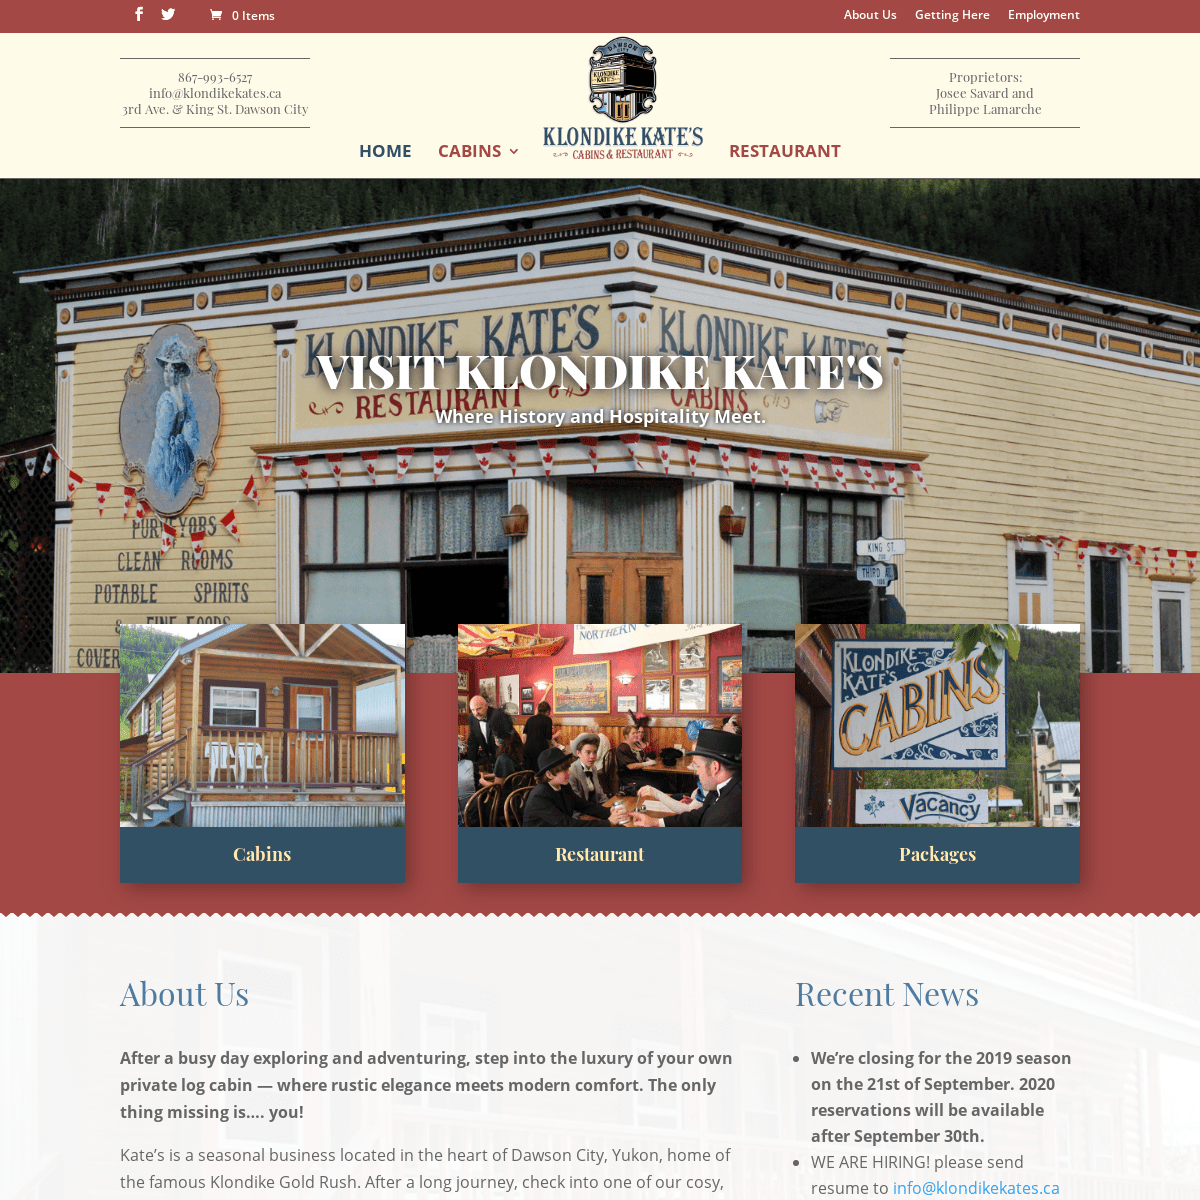 Klondike Kates - Dawson City Cabin Rentals - Yukon Accommodations | Centrally located in Dawson City with upscale Cabin rentals